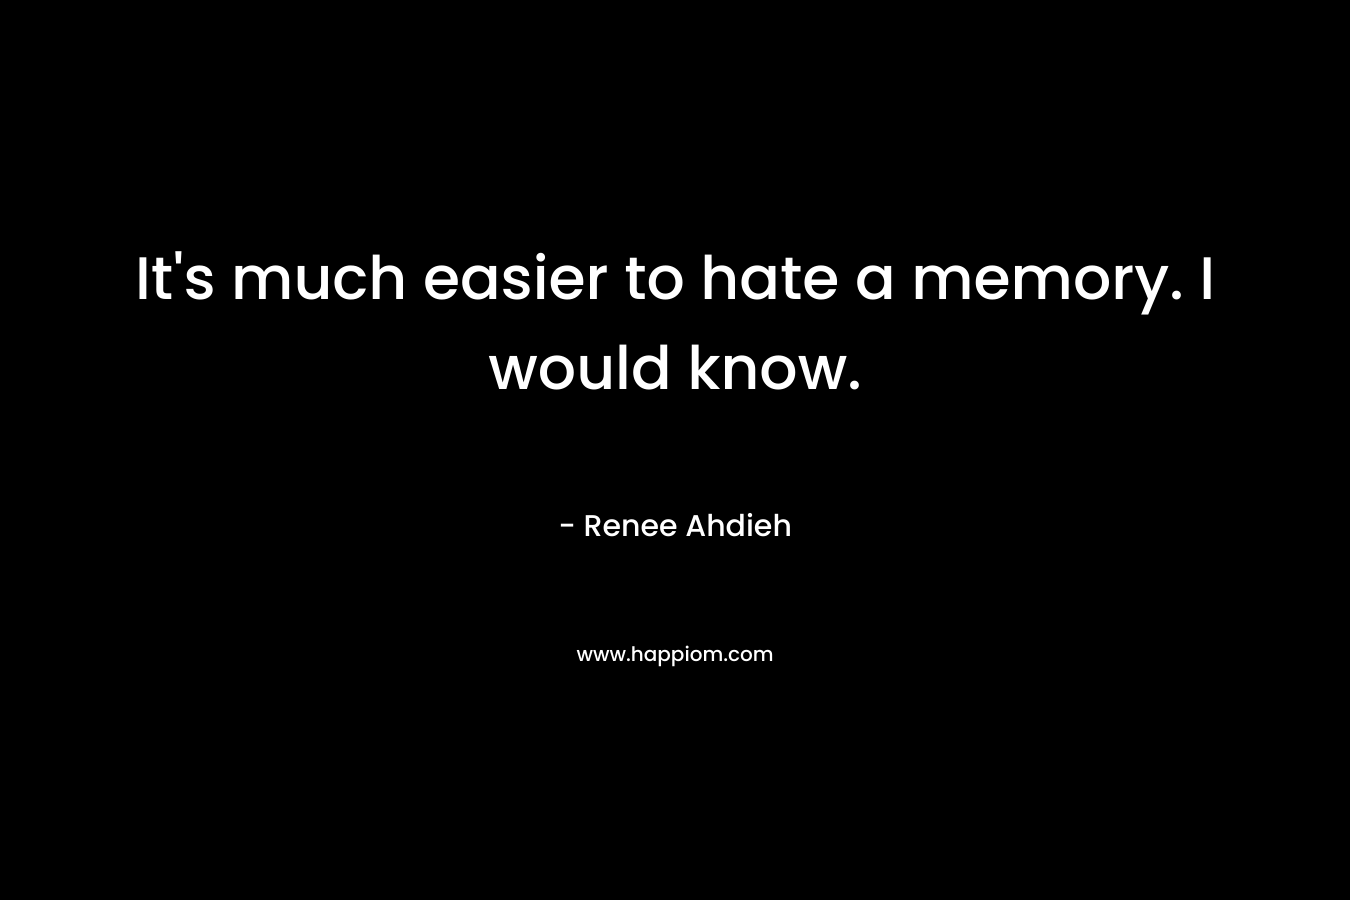 It’s much easier to hate a memory. I would know. – Renee Ahdieh